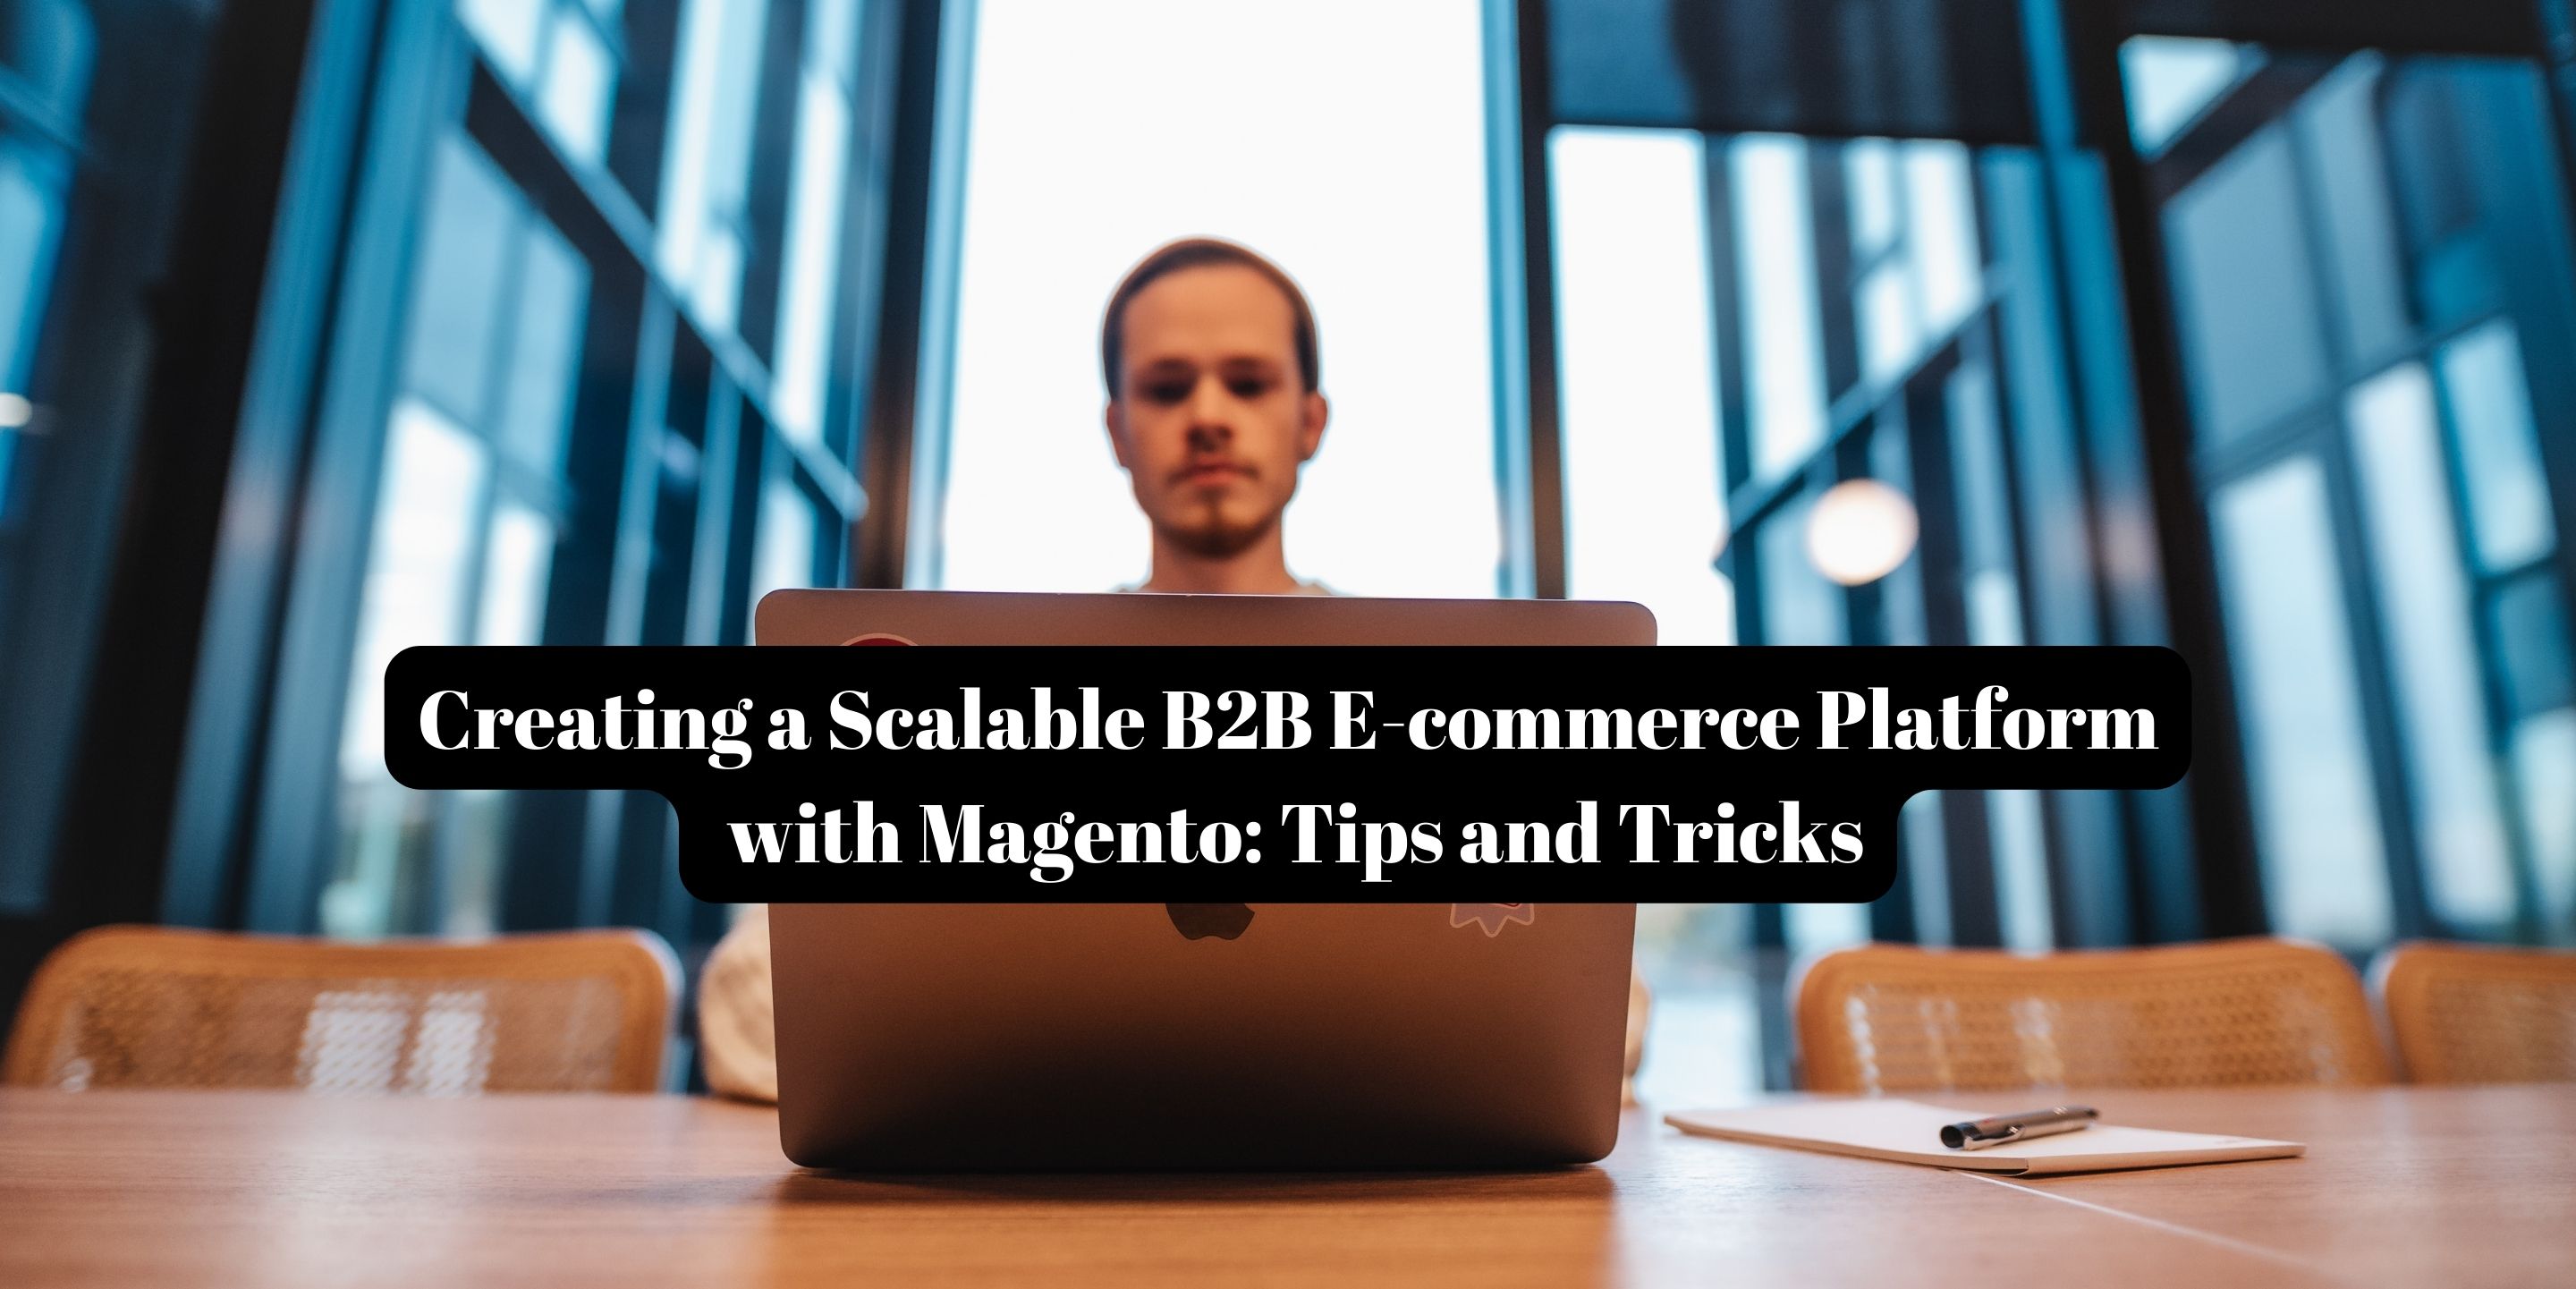 Creating a Scalable B2B E-commerce Platform with Magento: Tips and Tricks